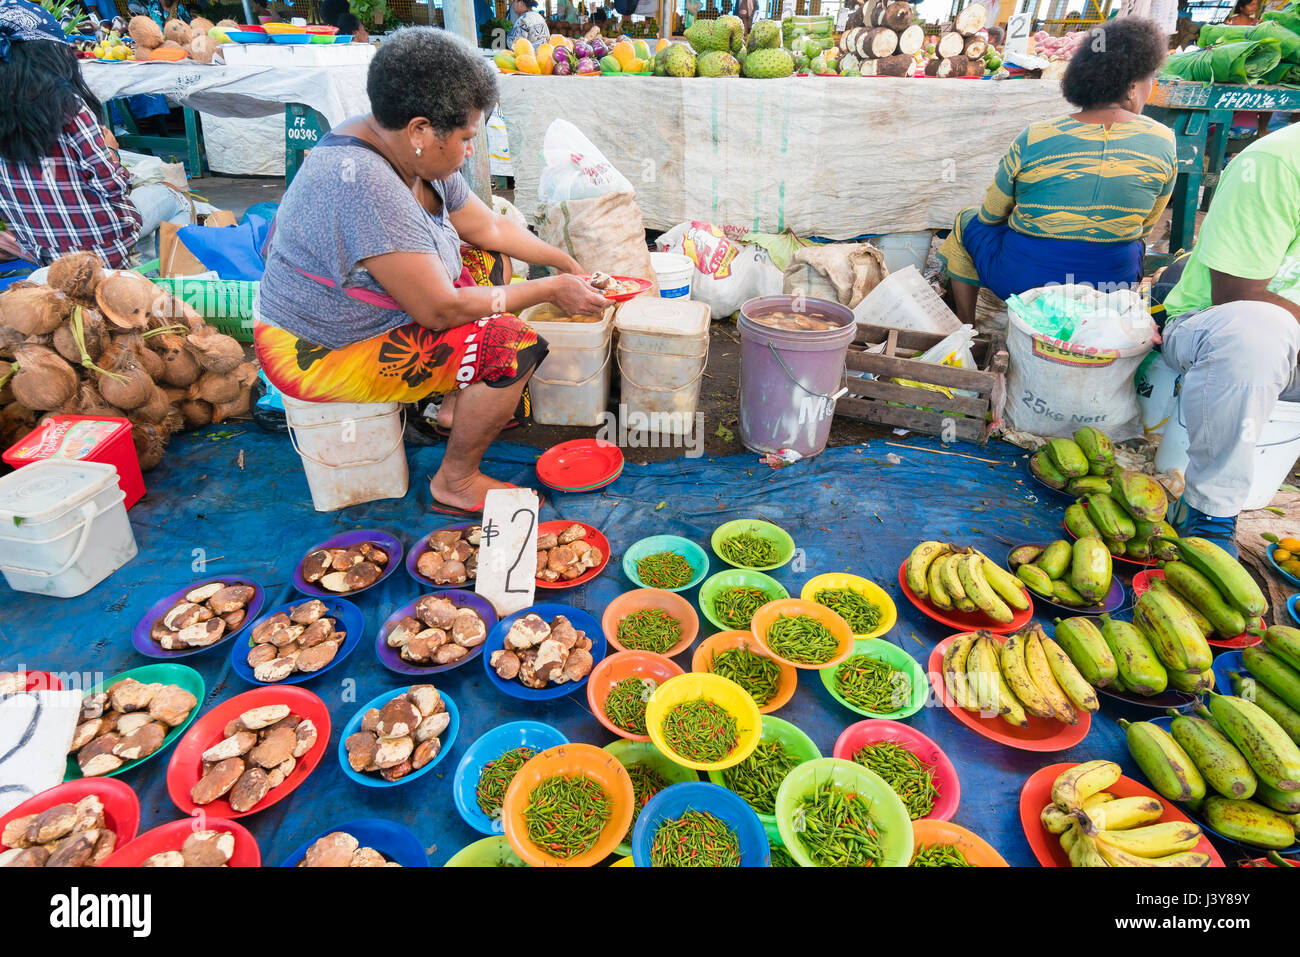 Suva, Fiji - Mar 24, 2017: View of people selling local produce at the grocery stores in Suva Market in Fiji Stock Photo